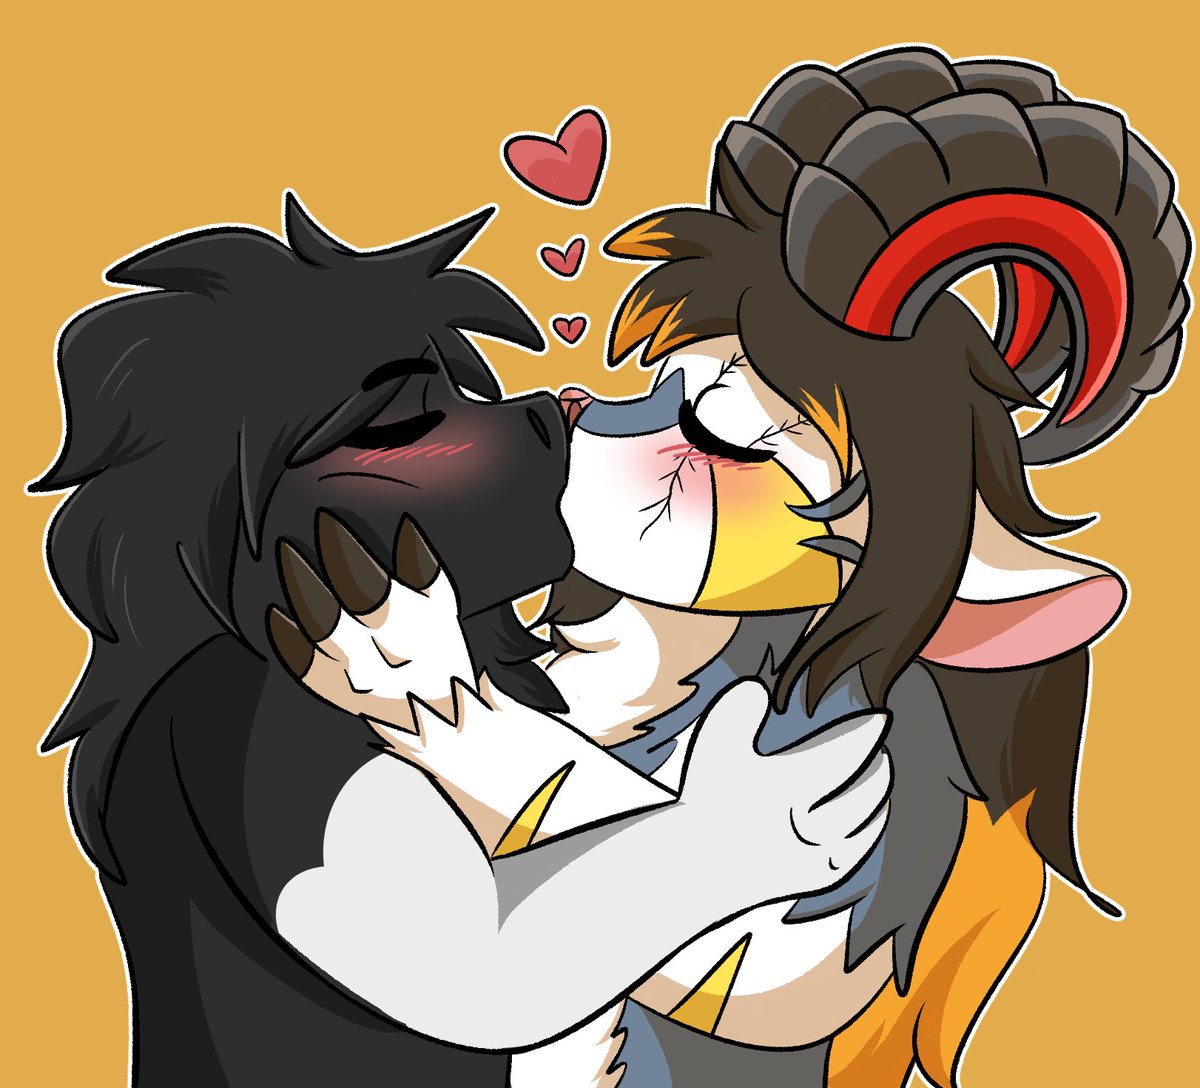 Commission for a friend on telegram of his sona in a makeout sesh with his crush. Thank you so much! f you like my work, consider buying a commission! Ask for my price sheet on my DM's! #commissionsopen #artCommission #commission #furry #furryart #cartoon #furryfandom